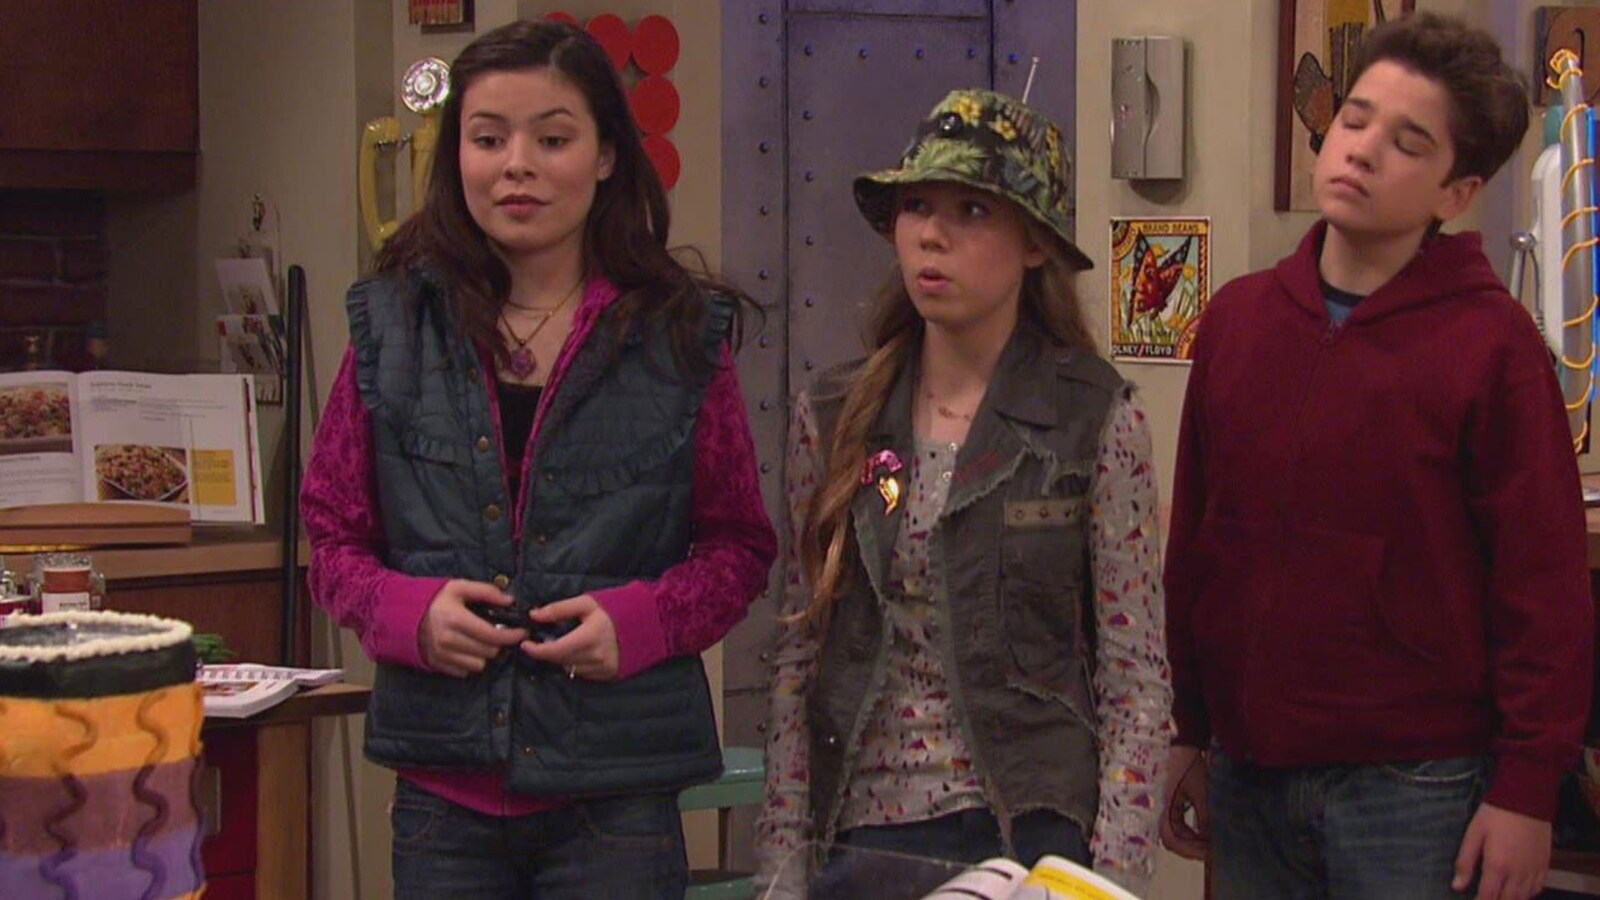 icarly/saeson-1/afsnit-21